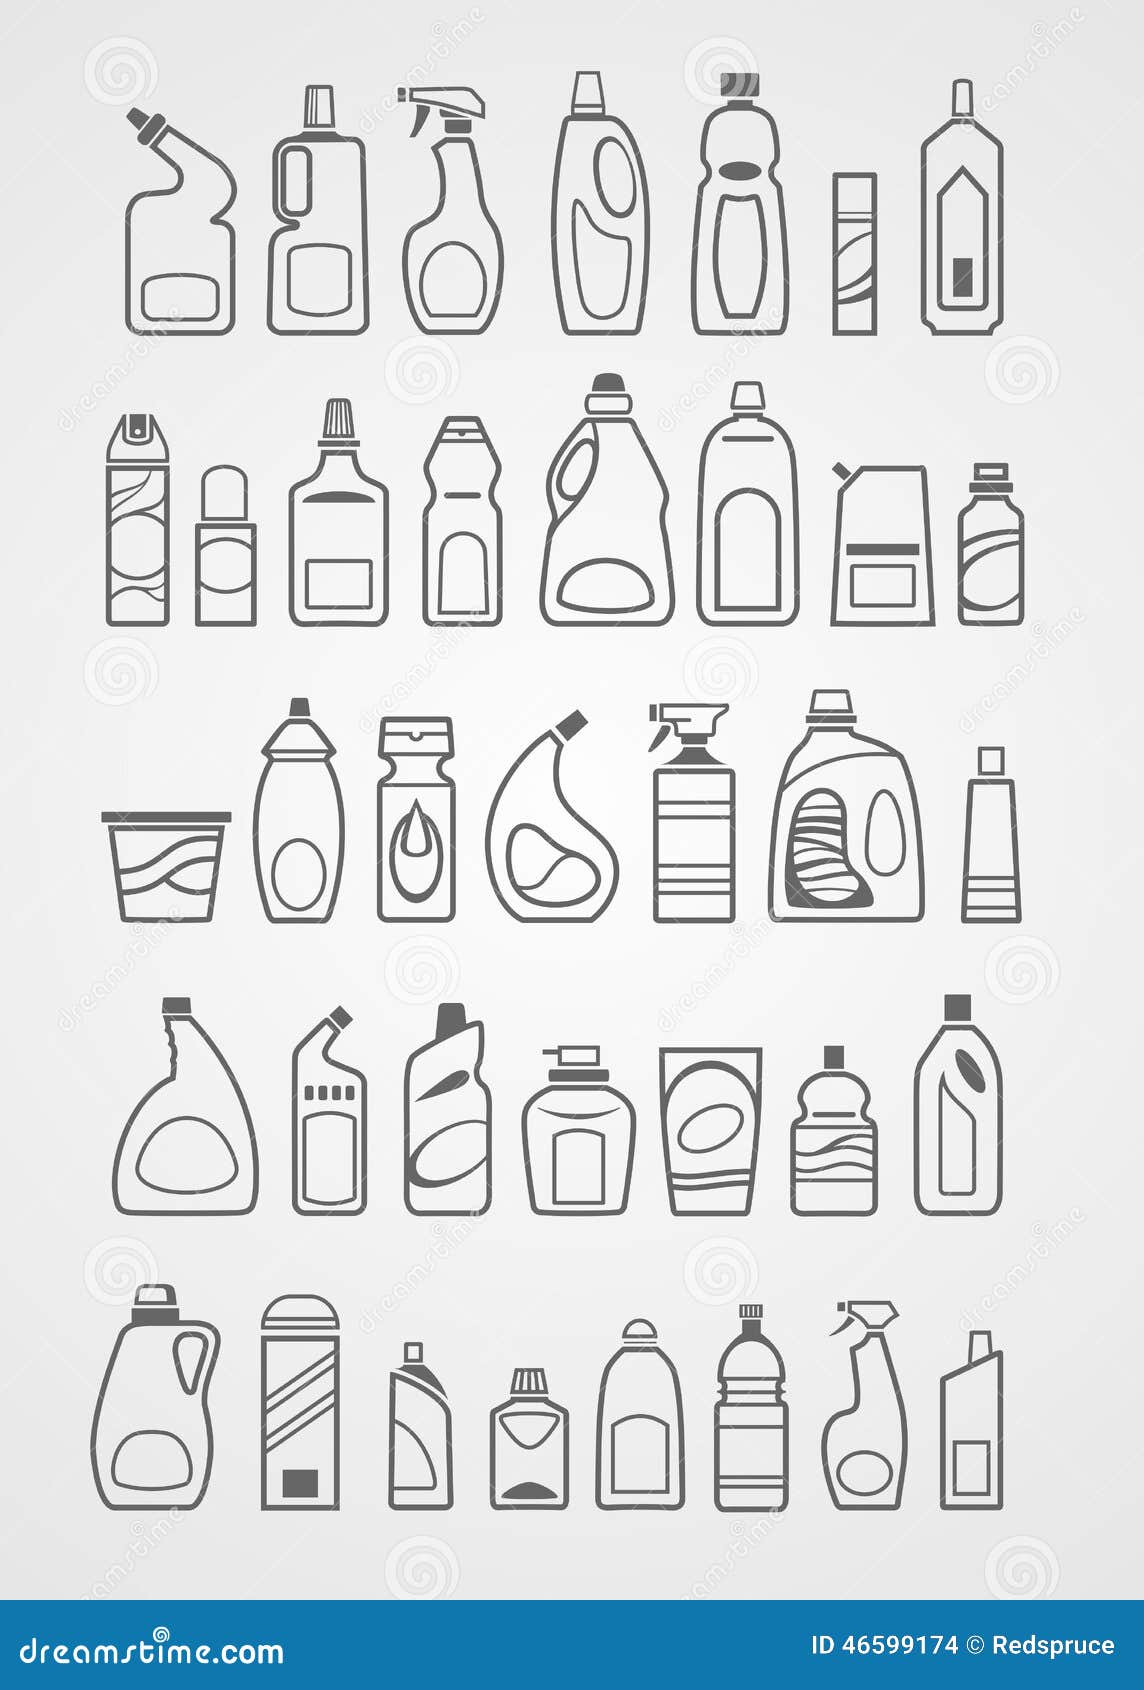 Household Goods Icons Stock Illustrations 353 Household Goods Icons Stock Illustrations Vectors Clipart Dreamstime